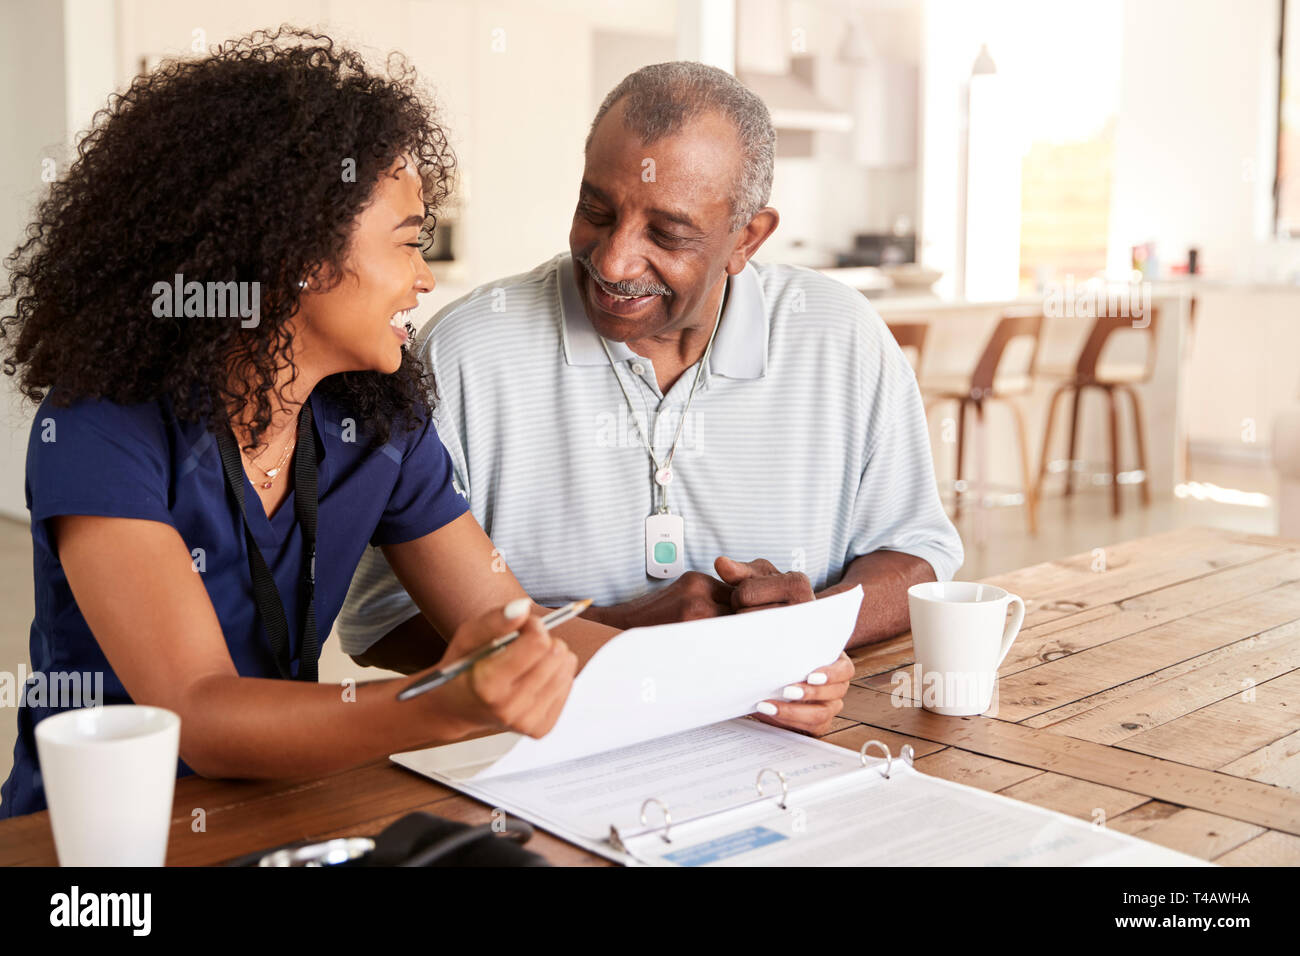 Happy female healthcare worker sitting at table smiling with a senior man during a home health visit Stock Photo